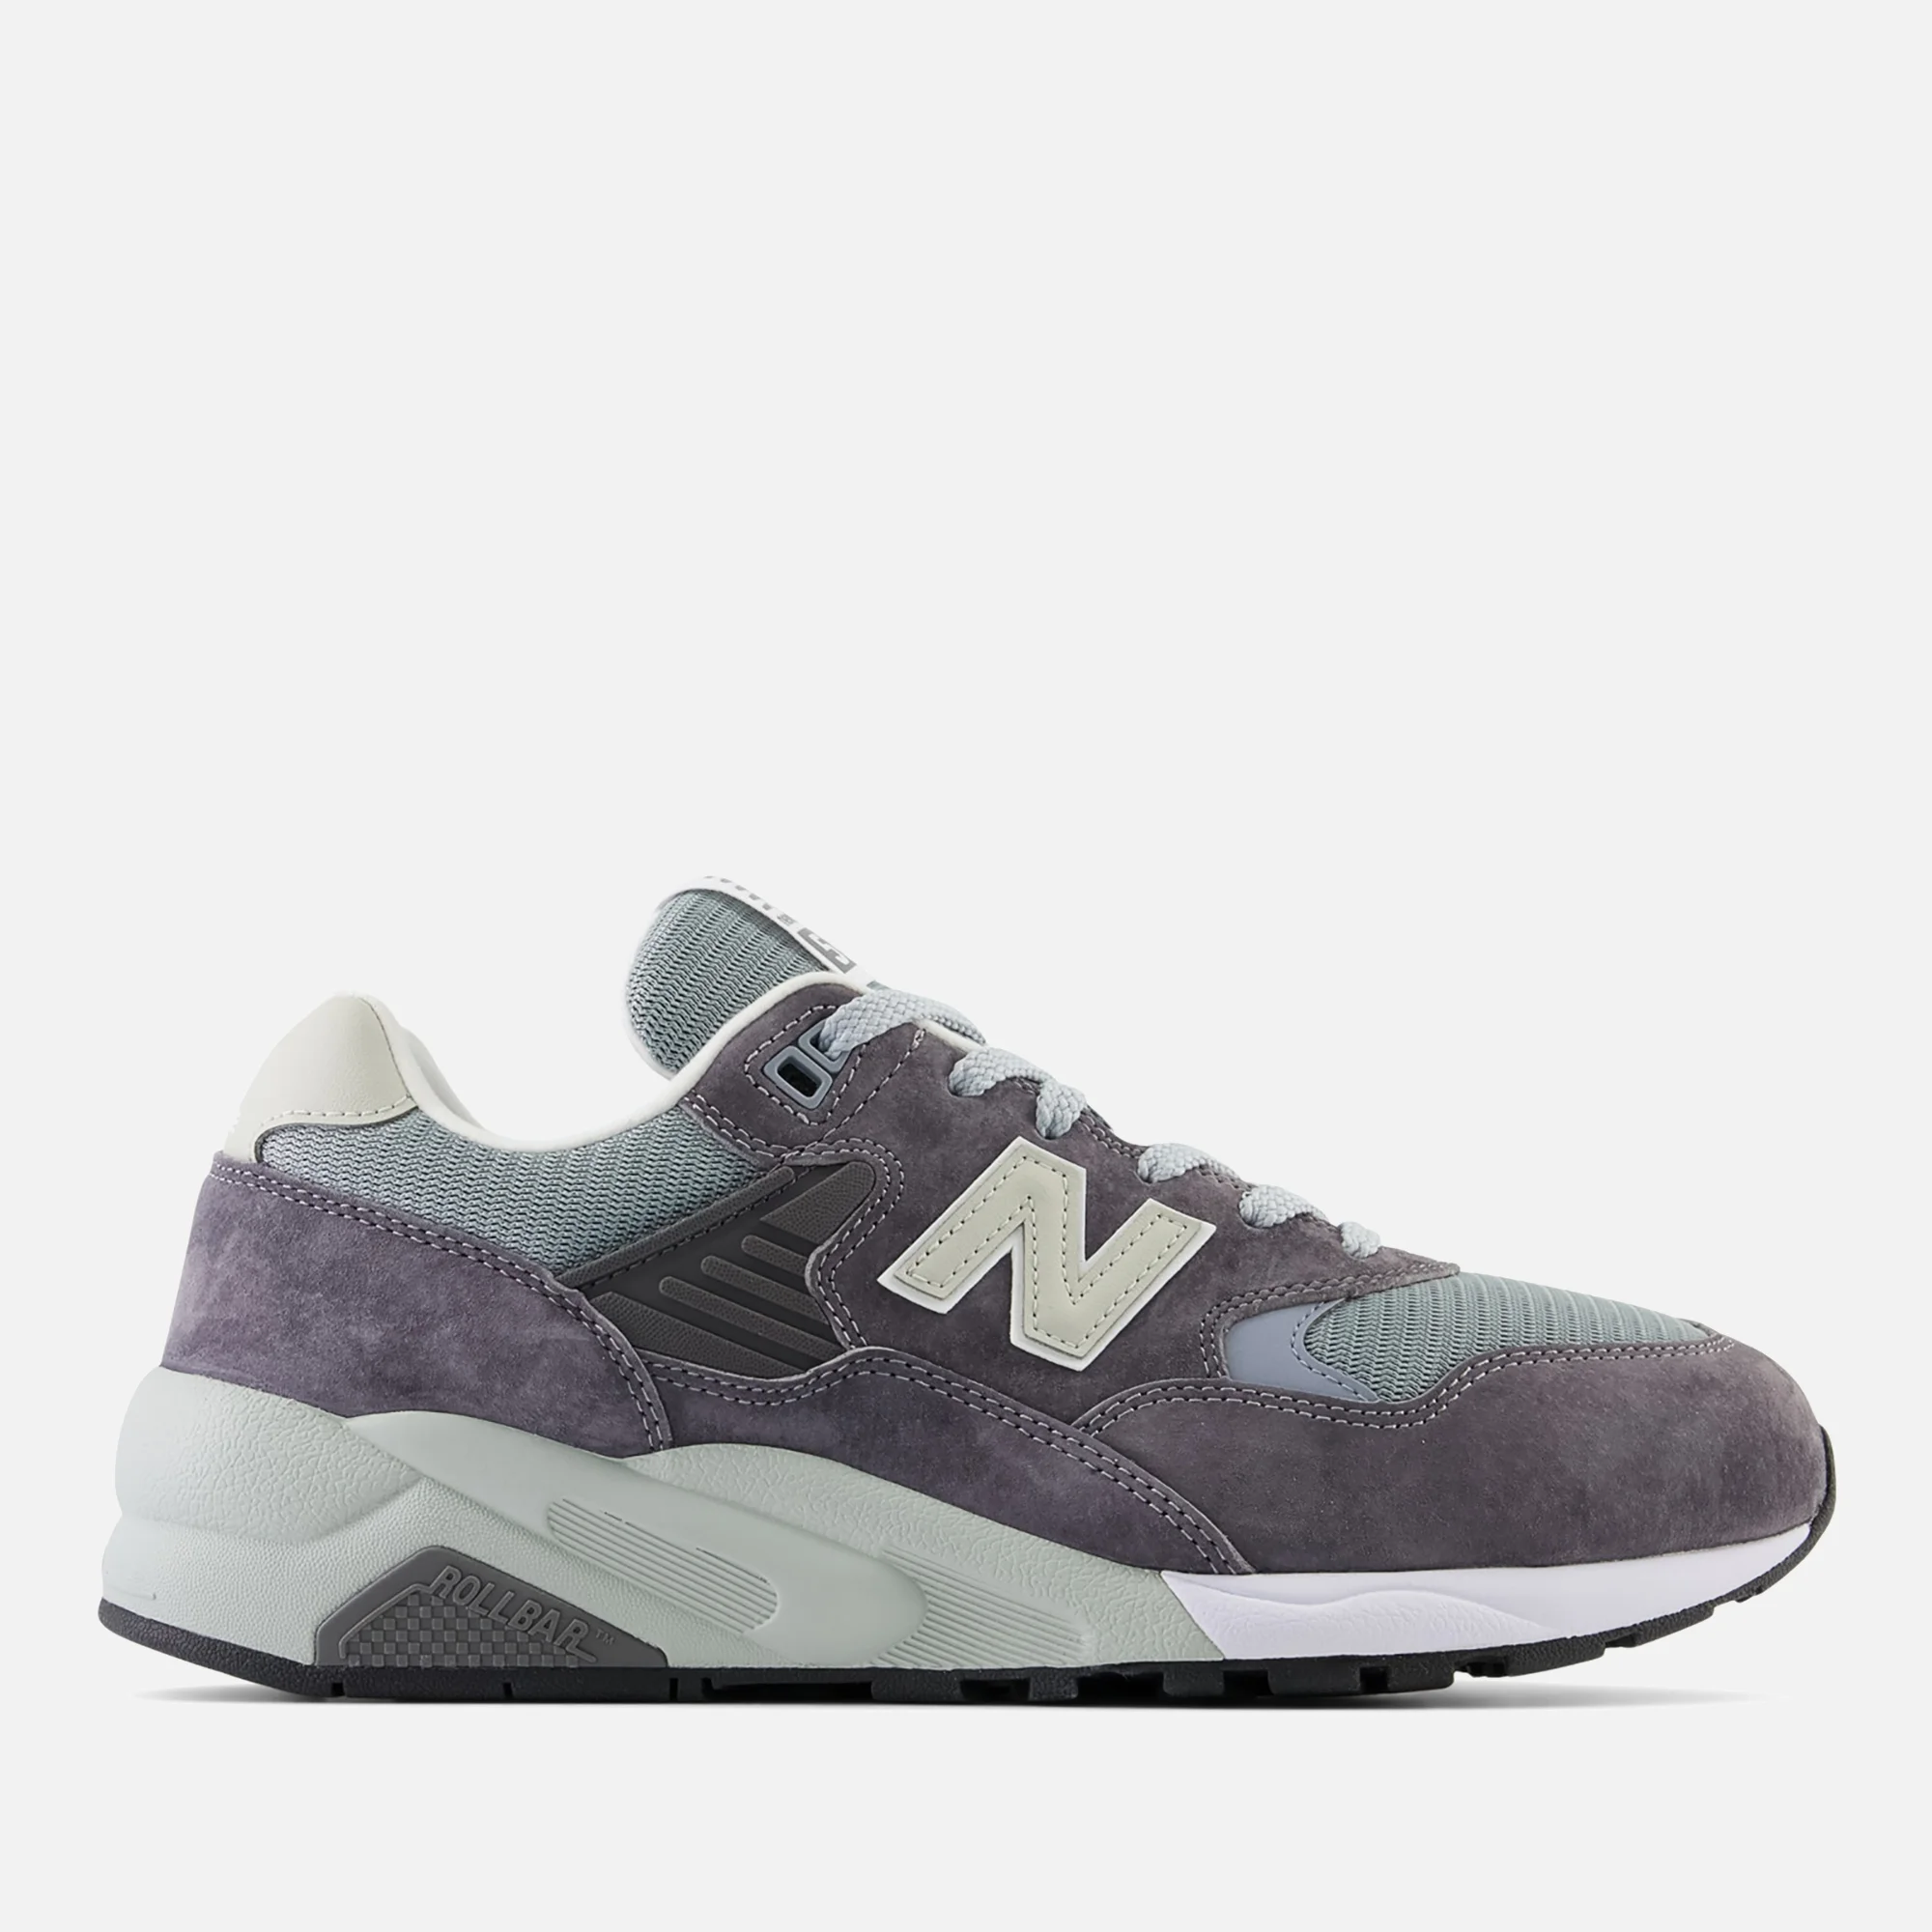 New Balance Men's 580 Suede and Mesh Trainers Image 1